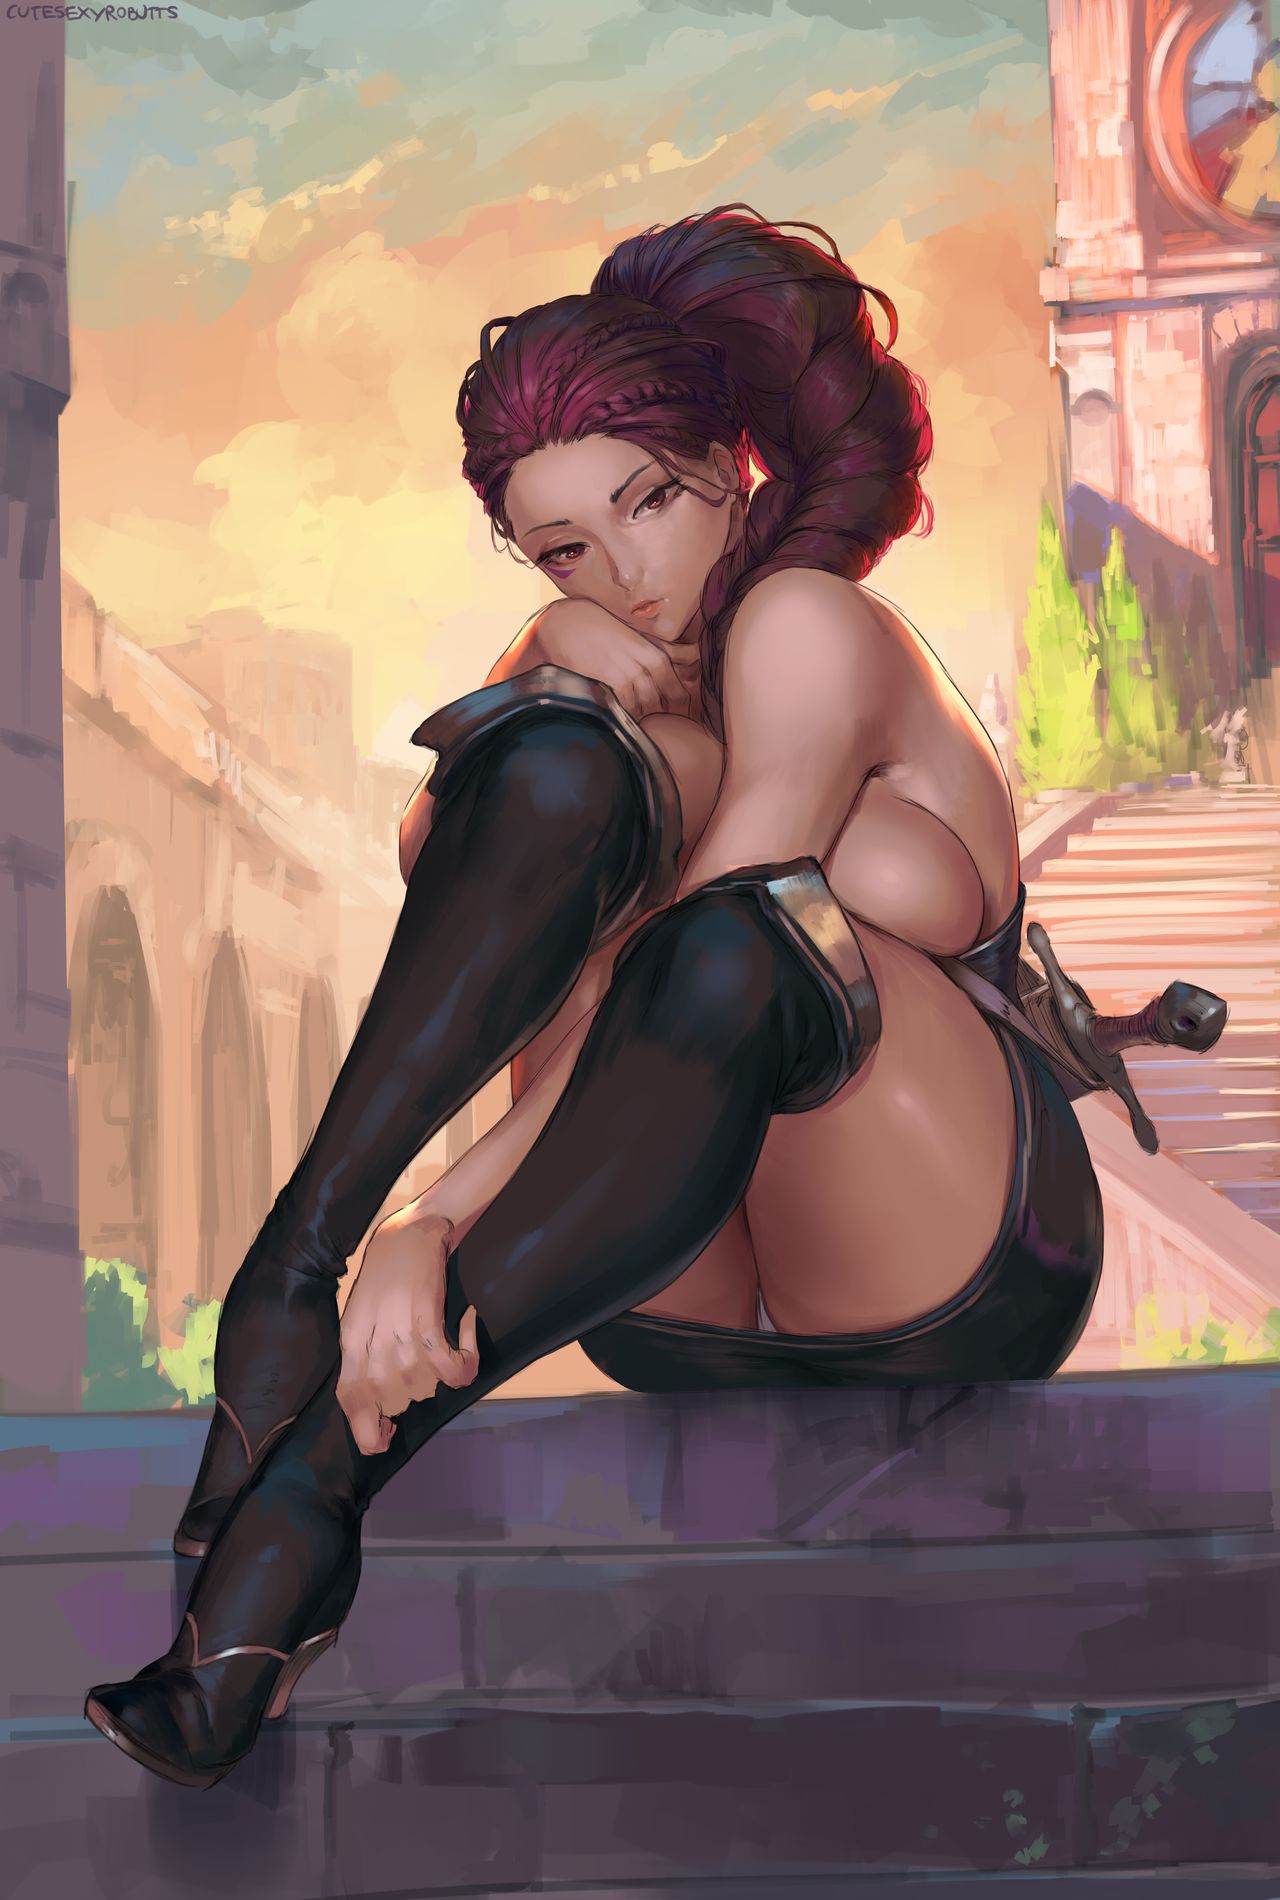 Cutesexyrobutts Patreon 2019-04 to Recent 56